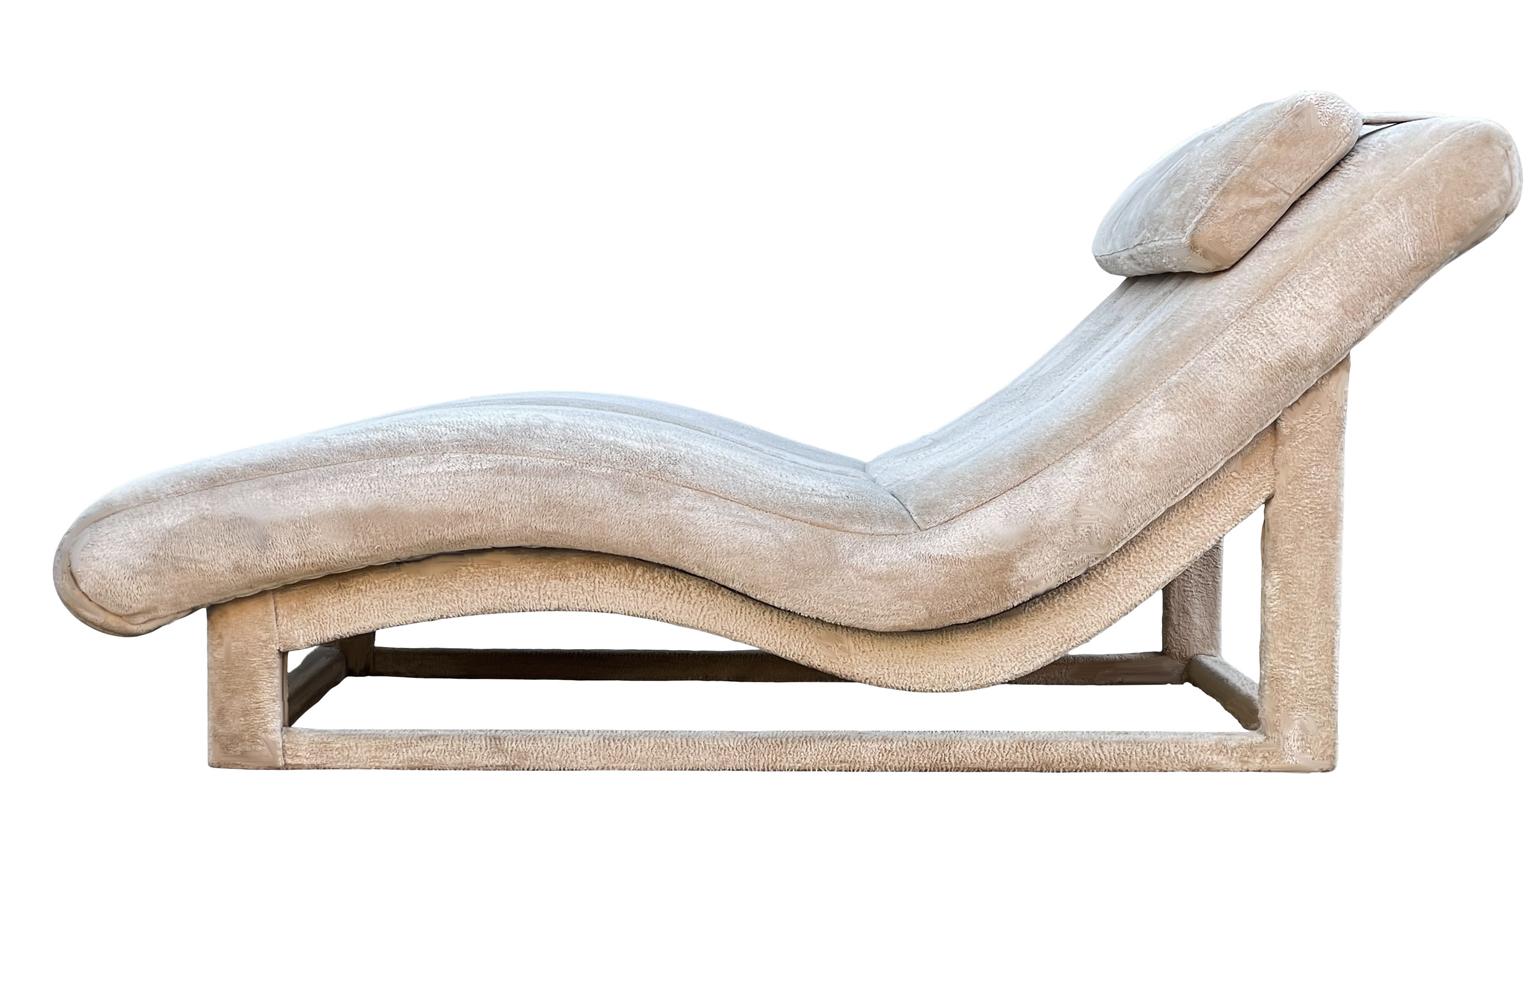 Late 20th Century Mid-Century Modern Wide Chaise Lounge Chair in Faux Fur After Milo Baughman